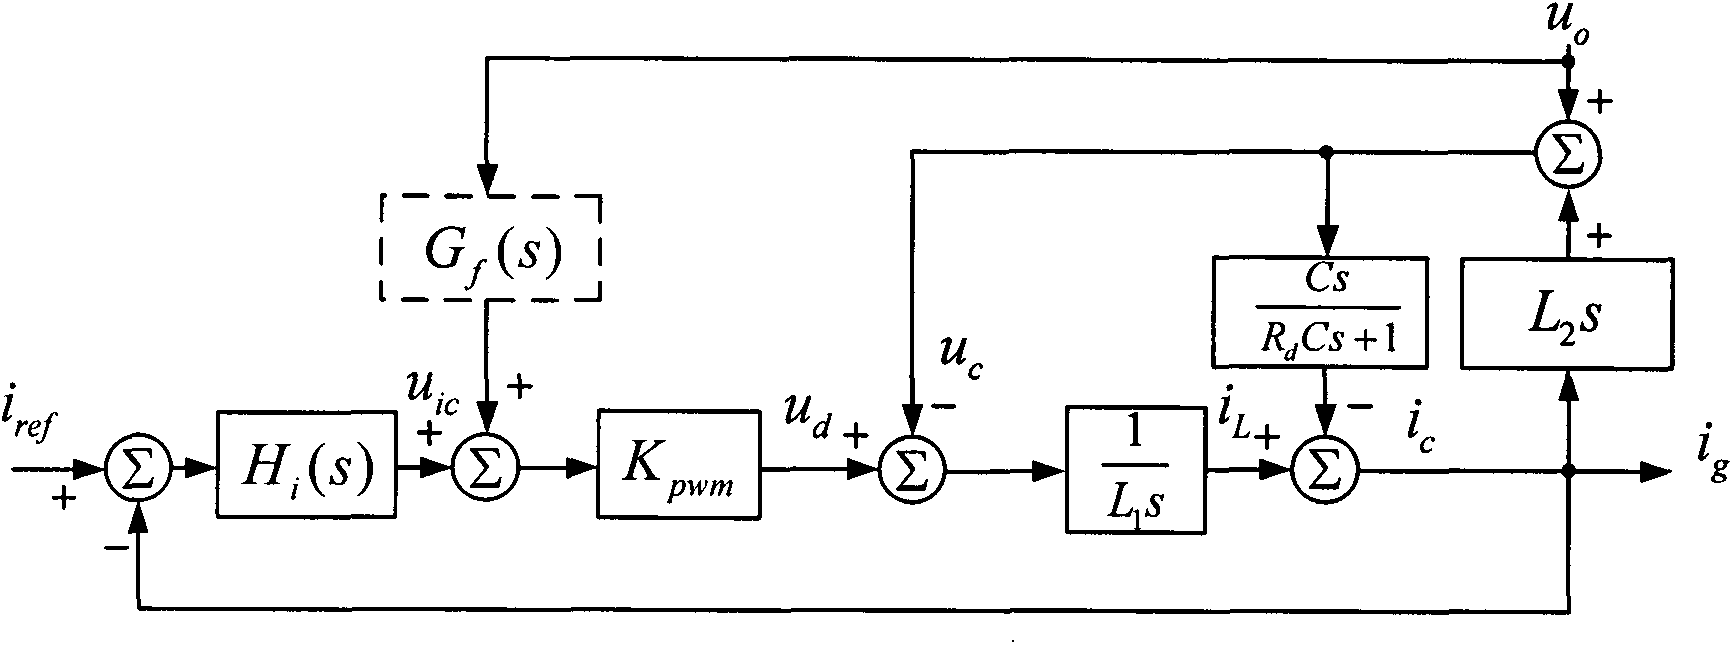 Phase angle margin compensation-based system impedance active control method of grid -connected inverter